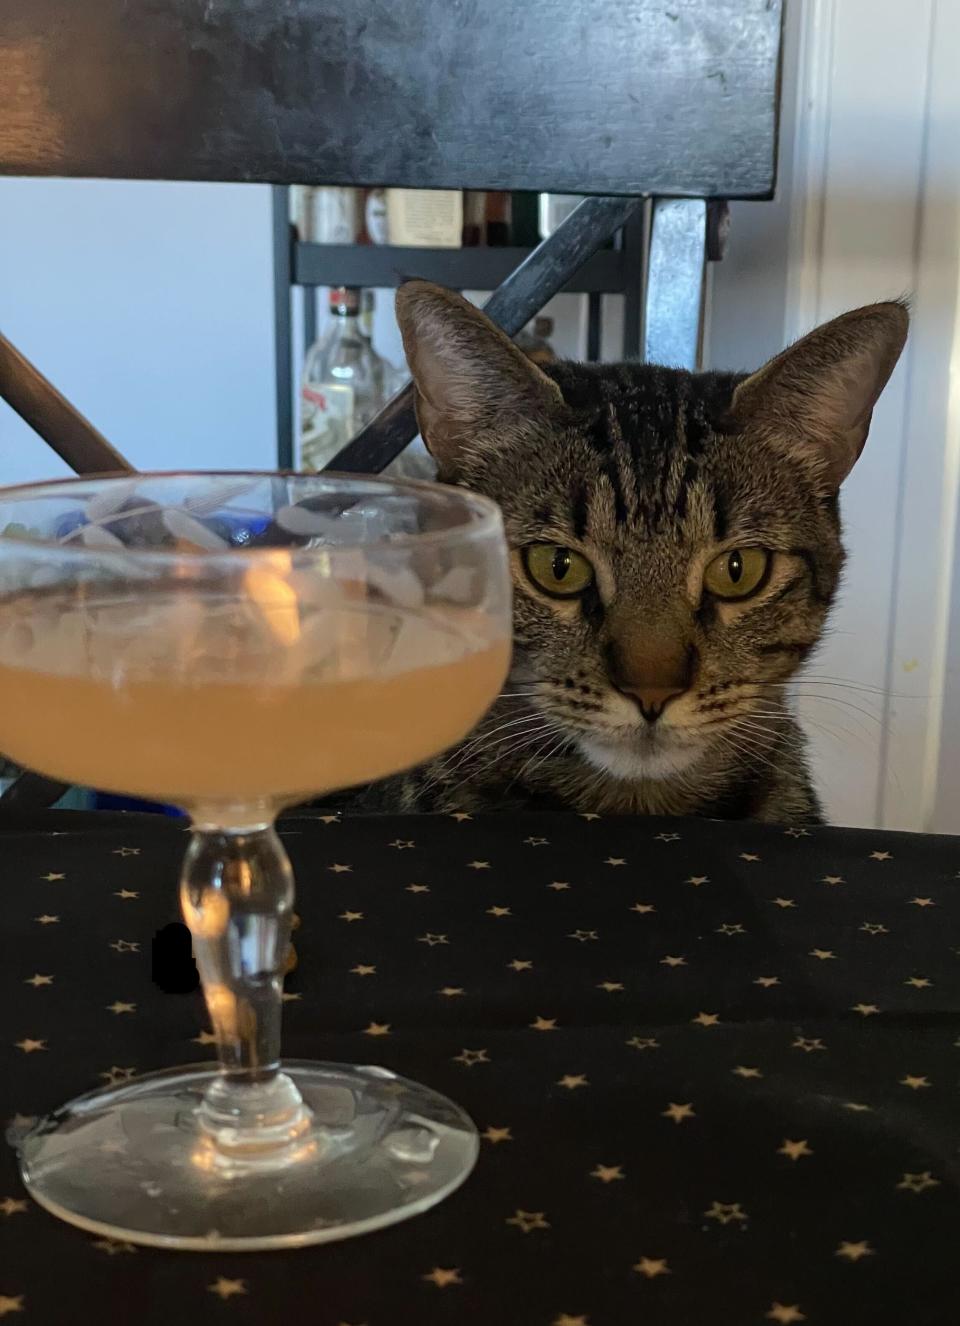 Cocktail glass on a table, and my cat Percy peeking over the table to see what's going on